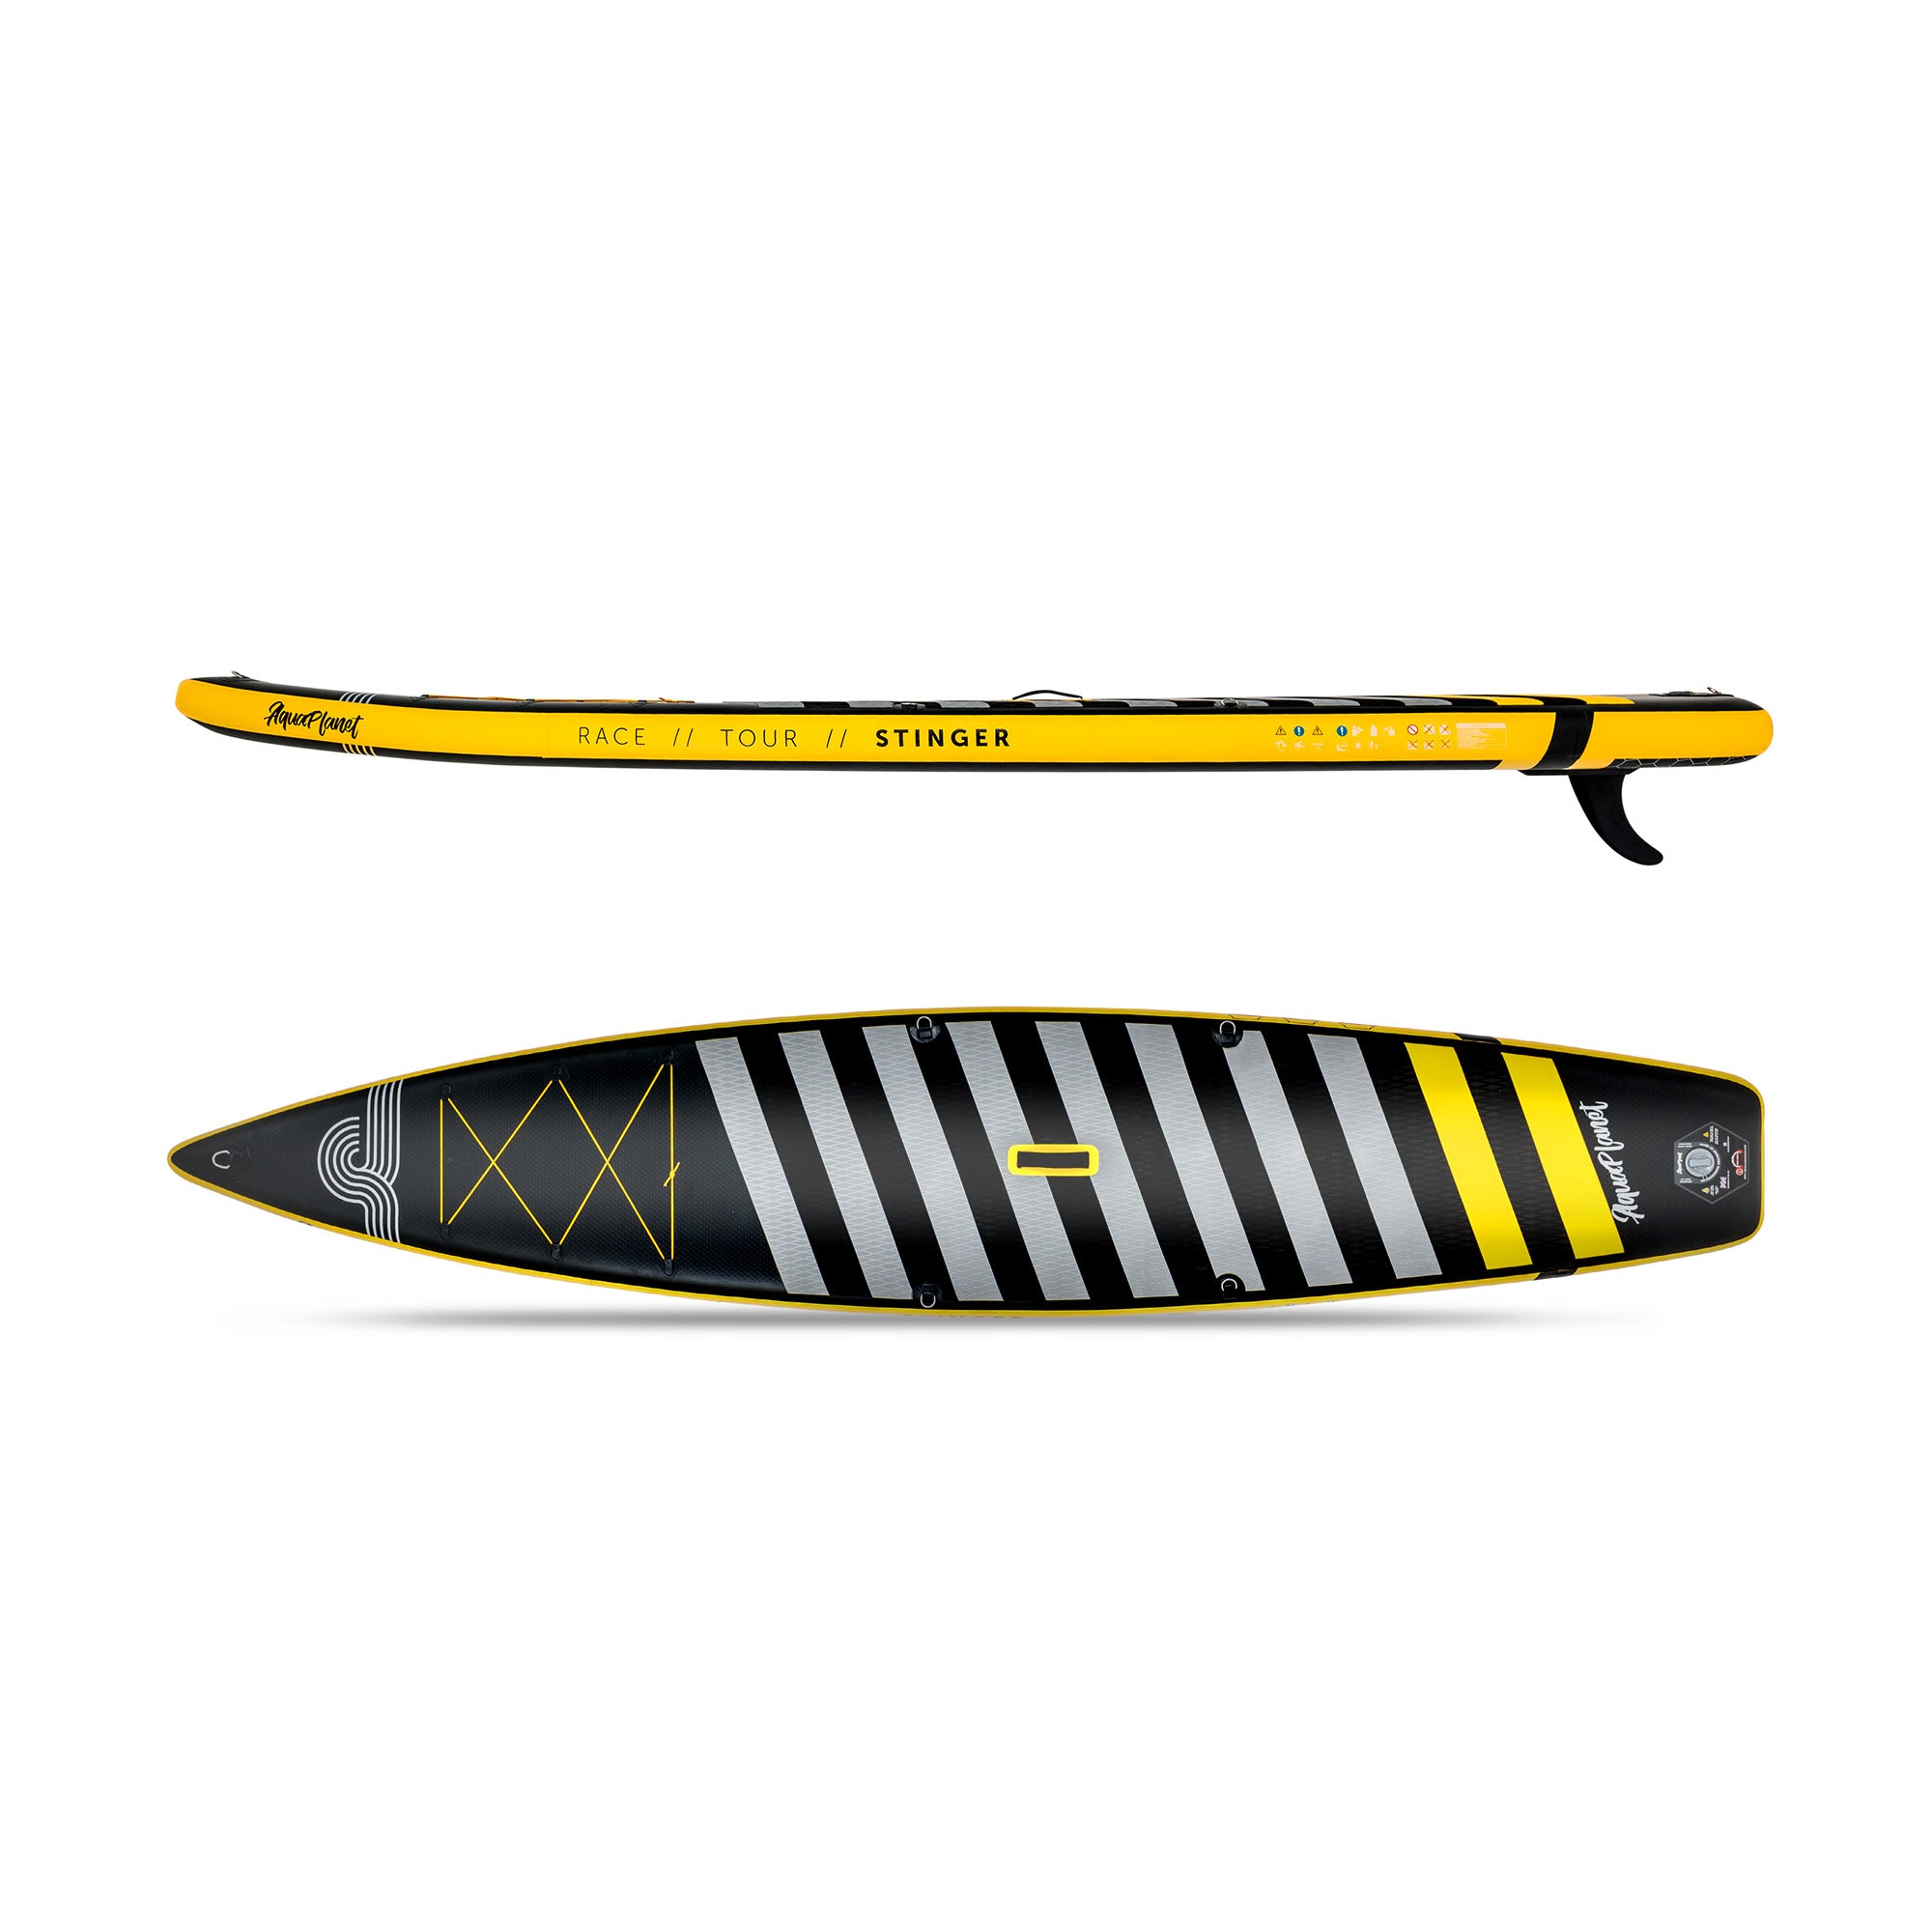 Top View and Side View of the Aquaplanet Stinger 12'6" iSUP Inflatable Stand Up Paddleboard Set